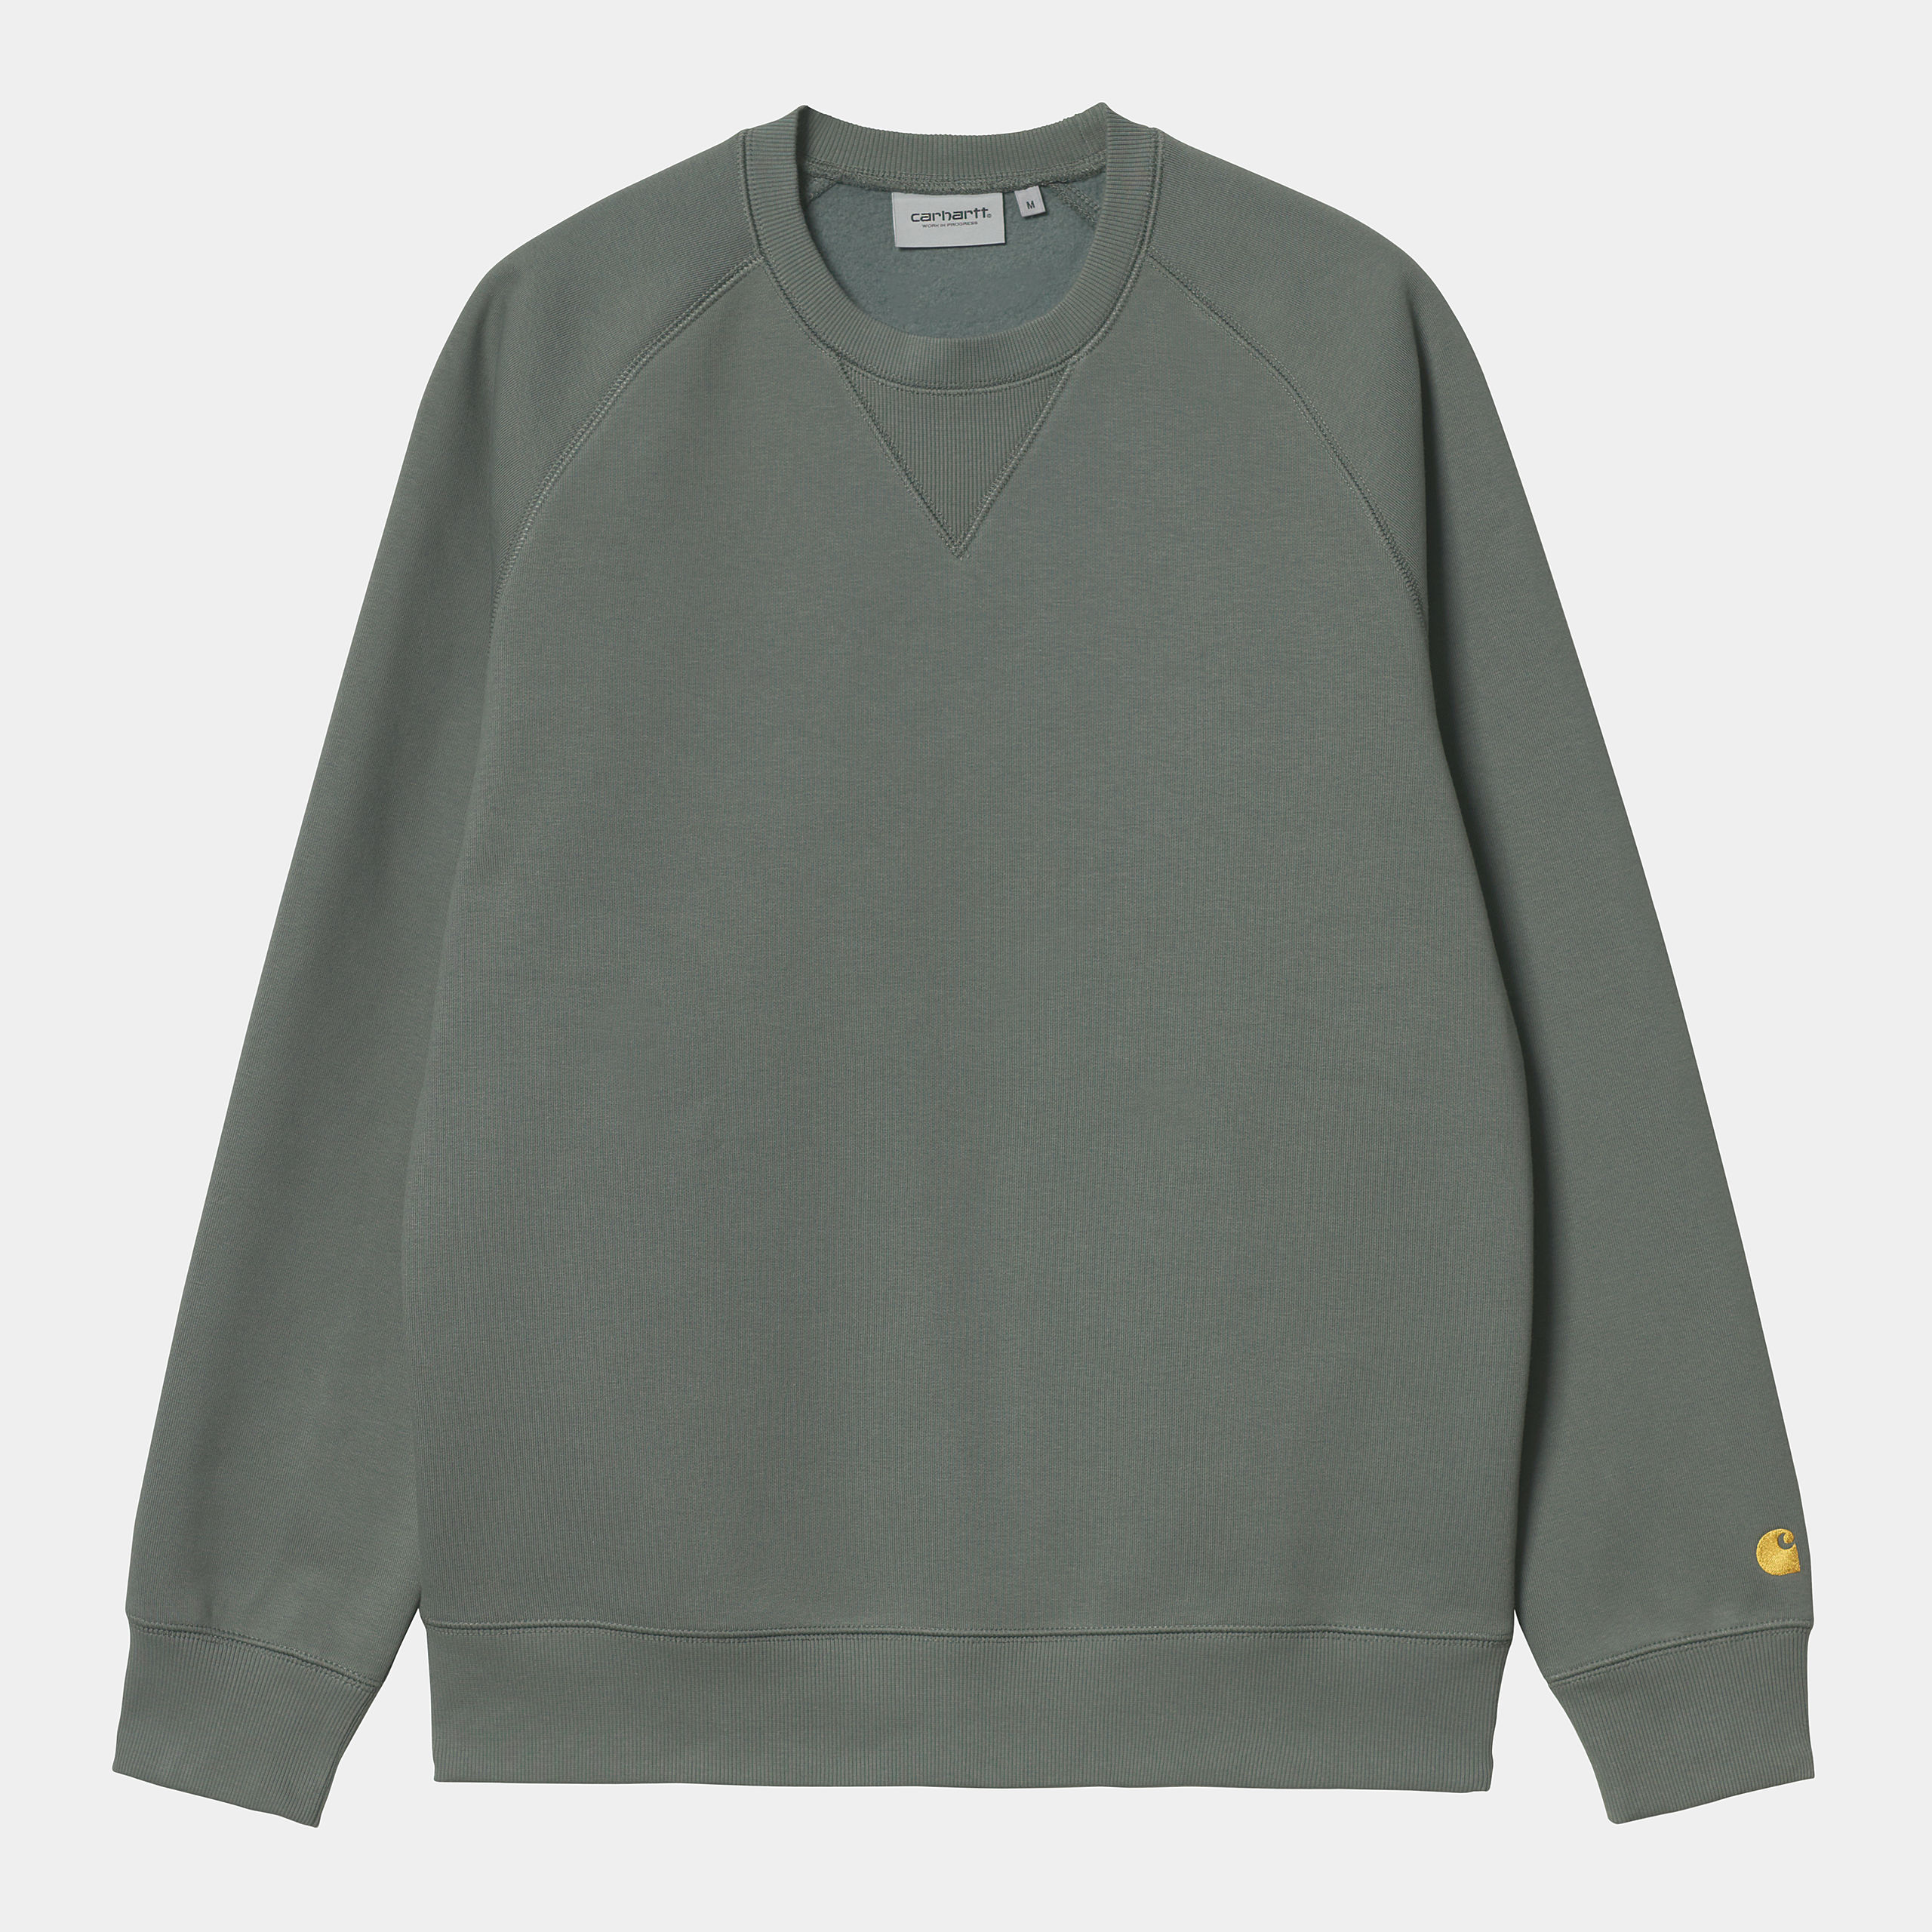 Carhartt WIP - CHASE SWEAT - Thyme/Gold